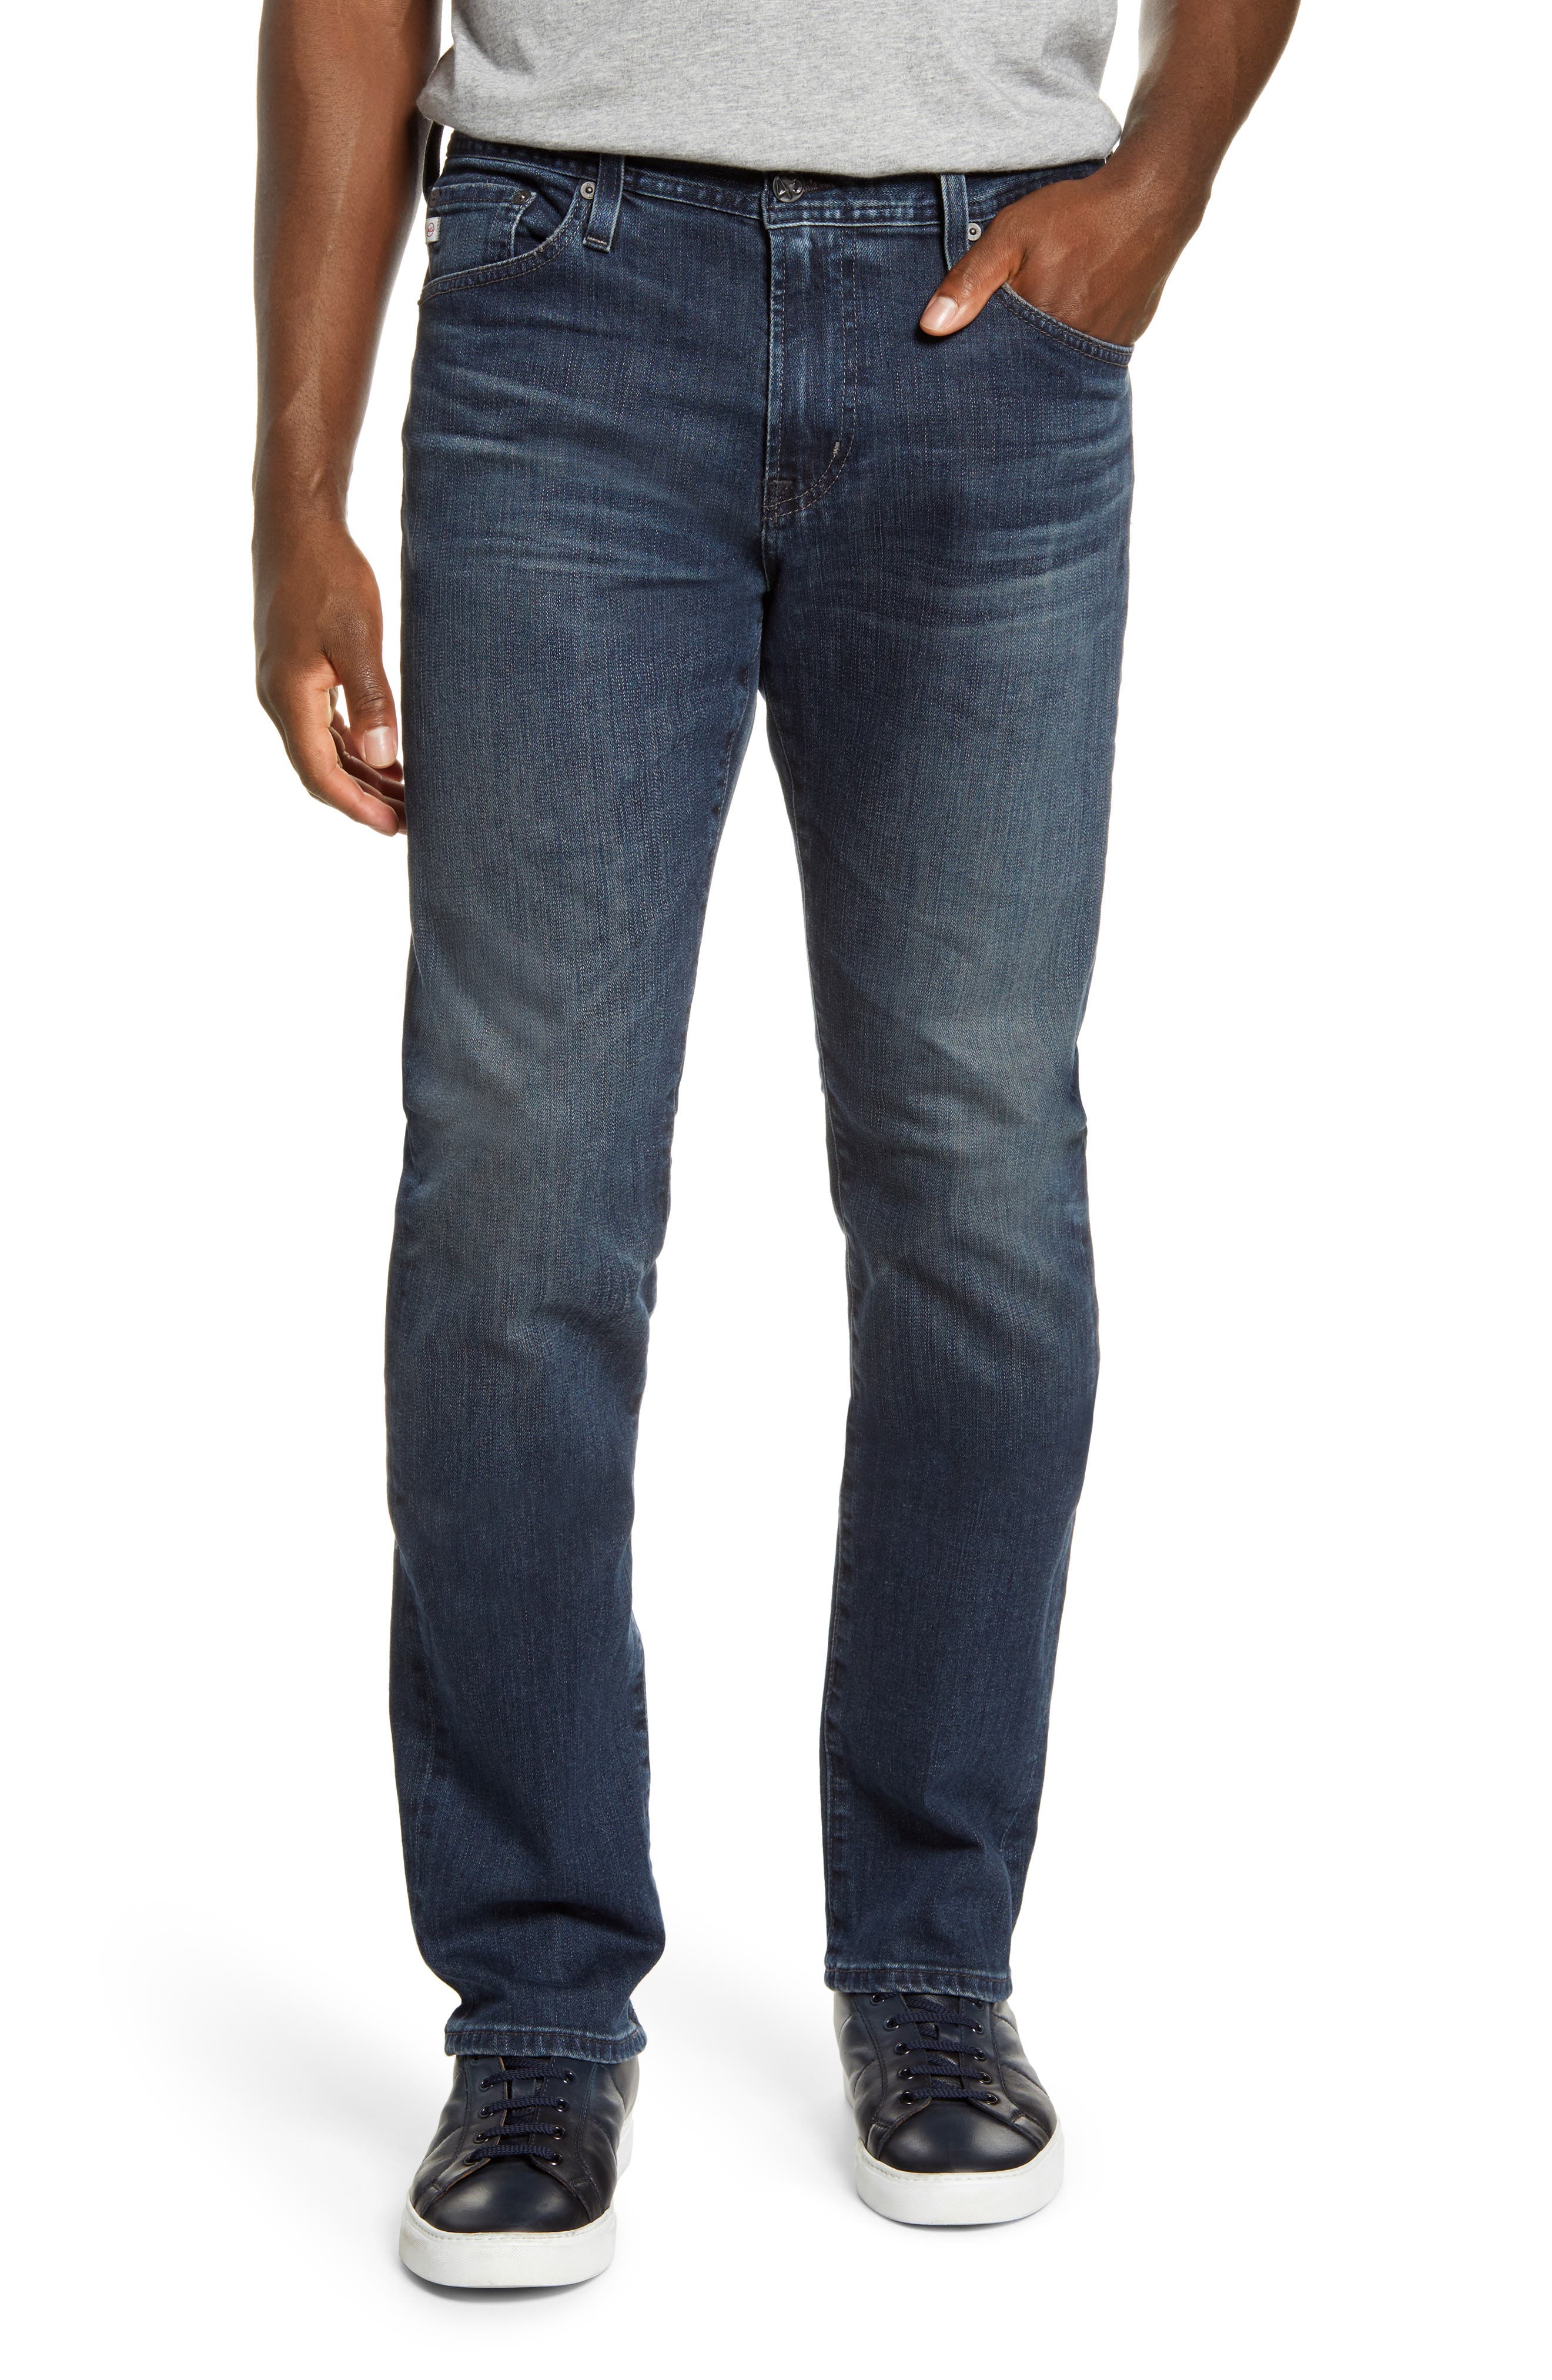 best jeans for men with short legs